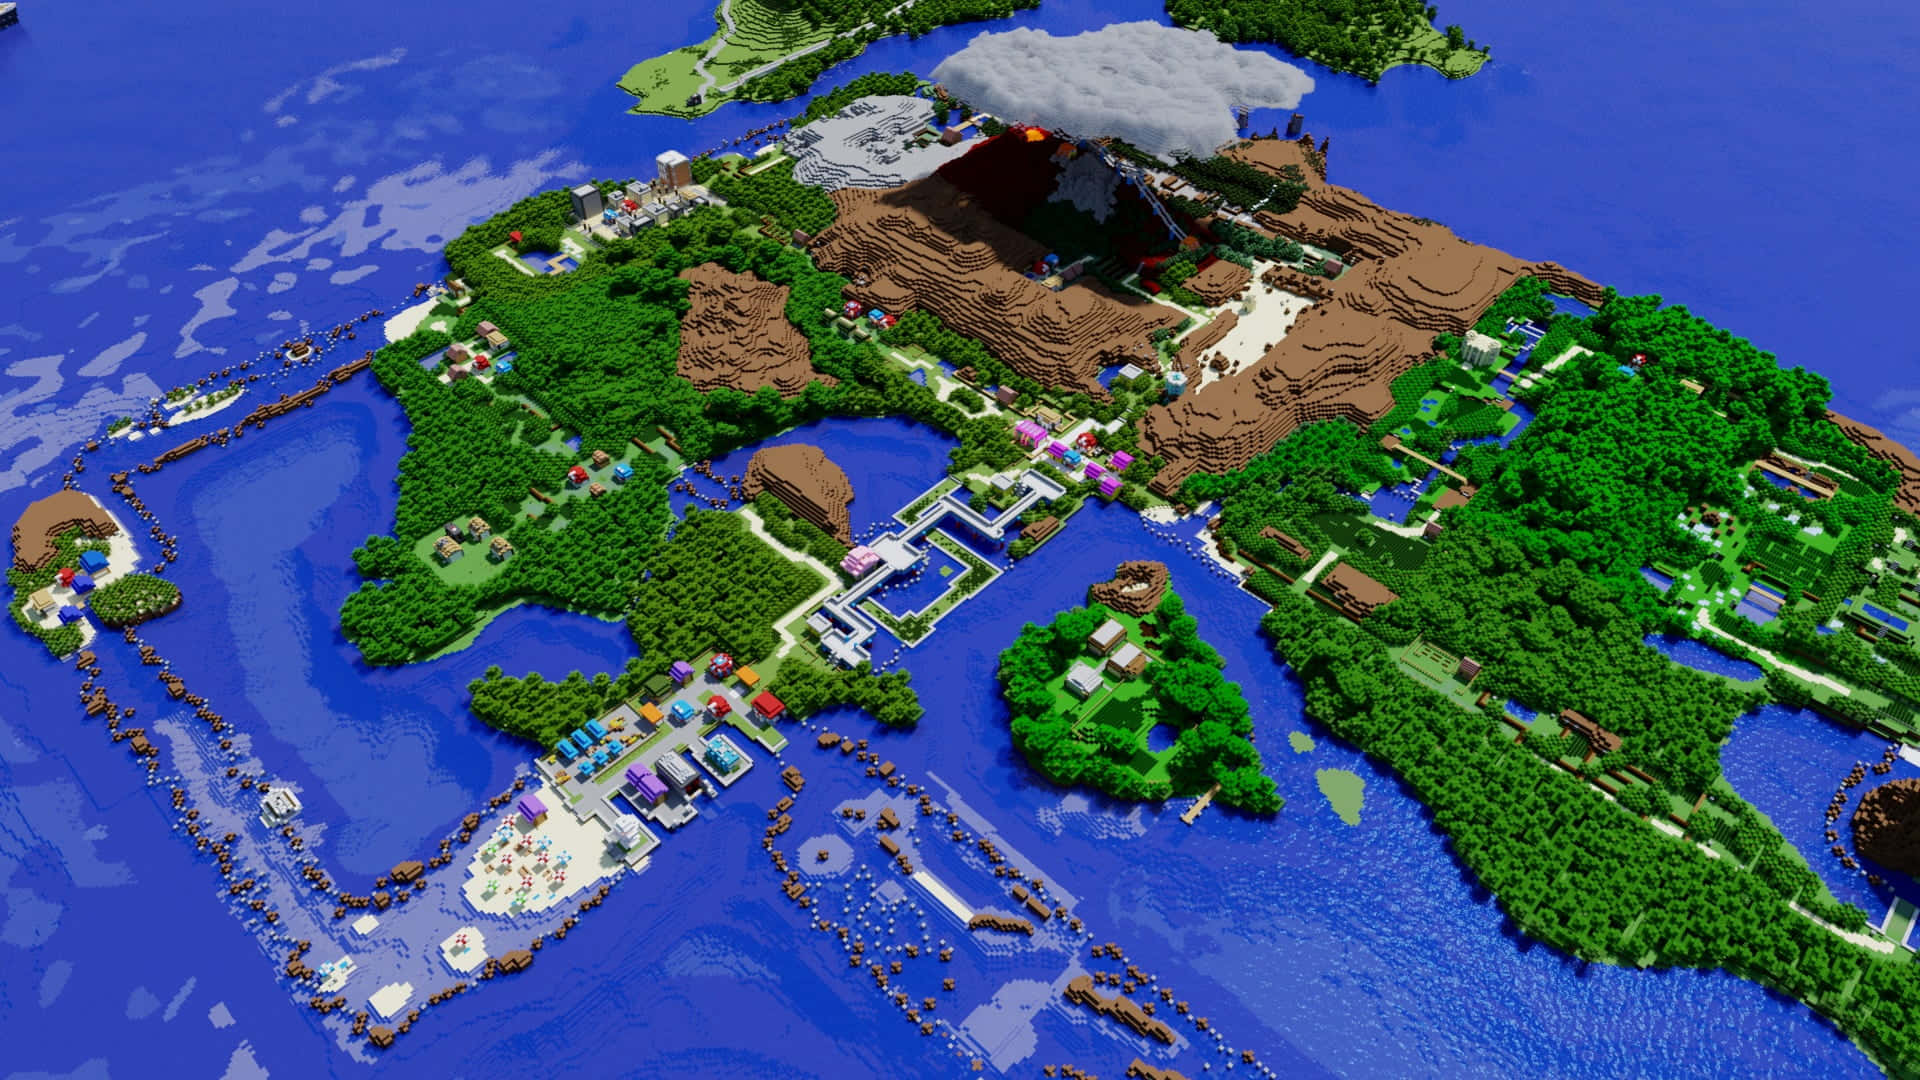 Stunning Minecraft Map with Various Biomes and Scenery Wallpaper